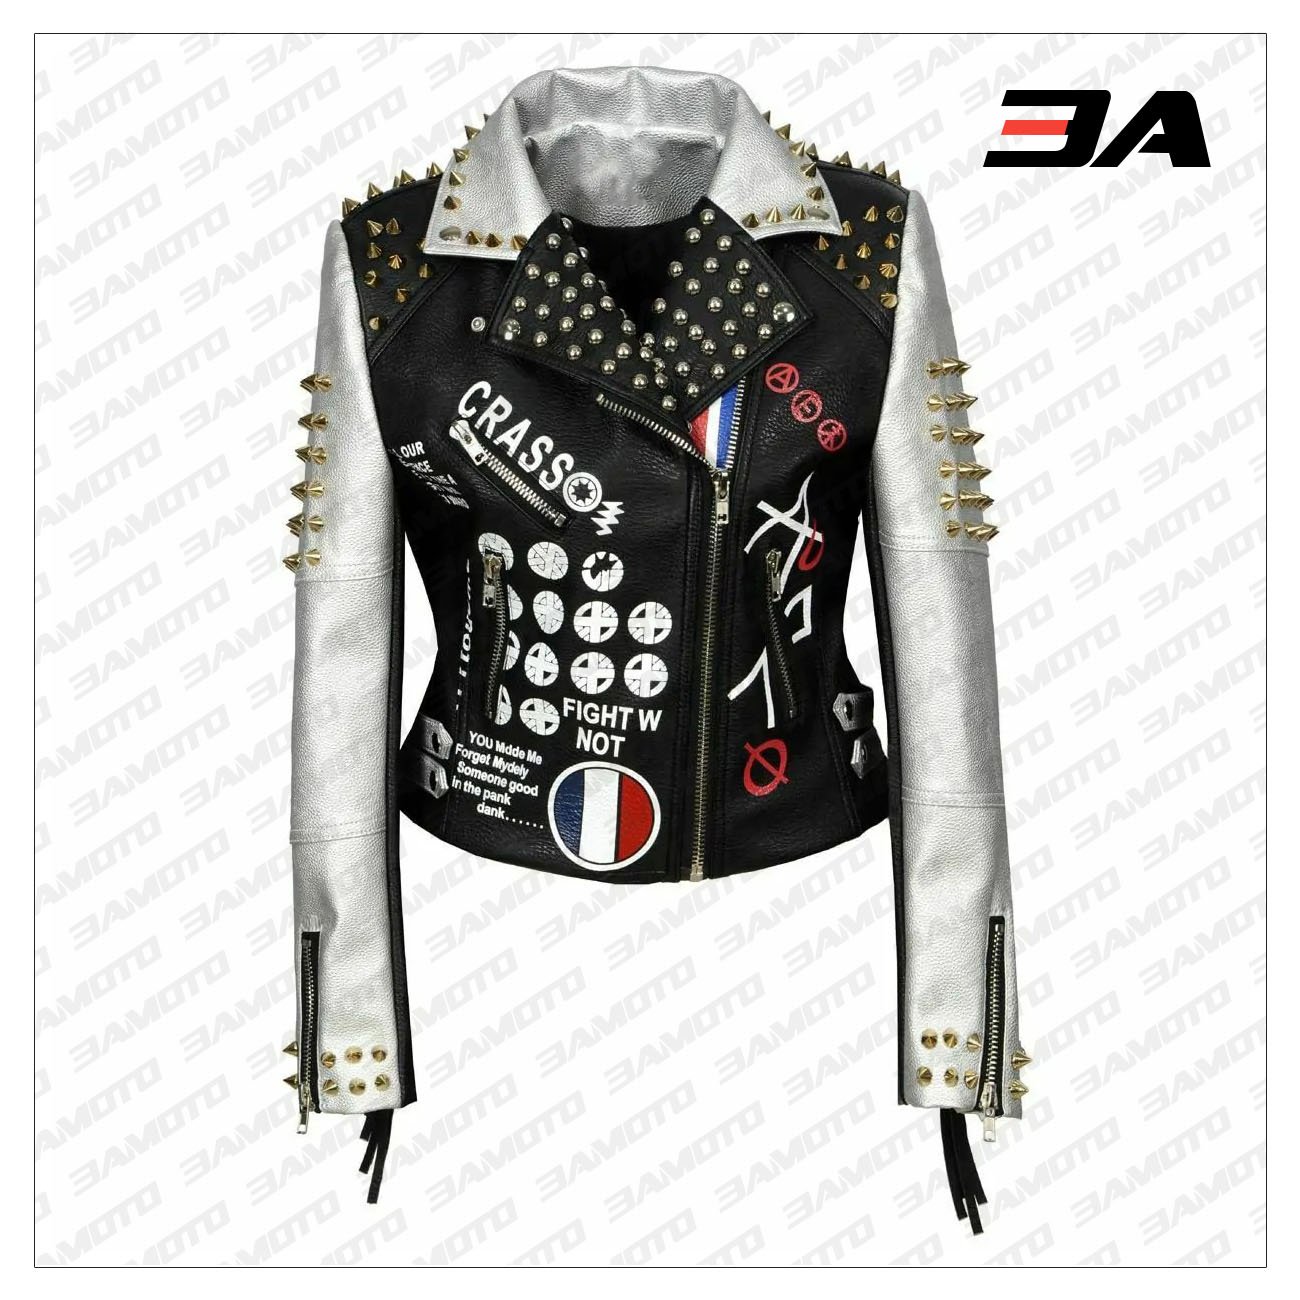 Women s Black Printed Leather Biker Jacket by 3a Moto Leather on